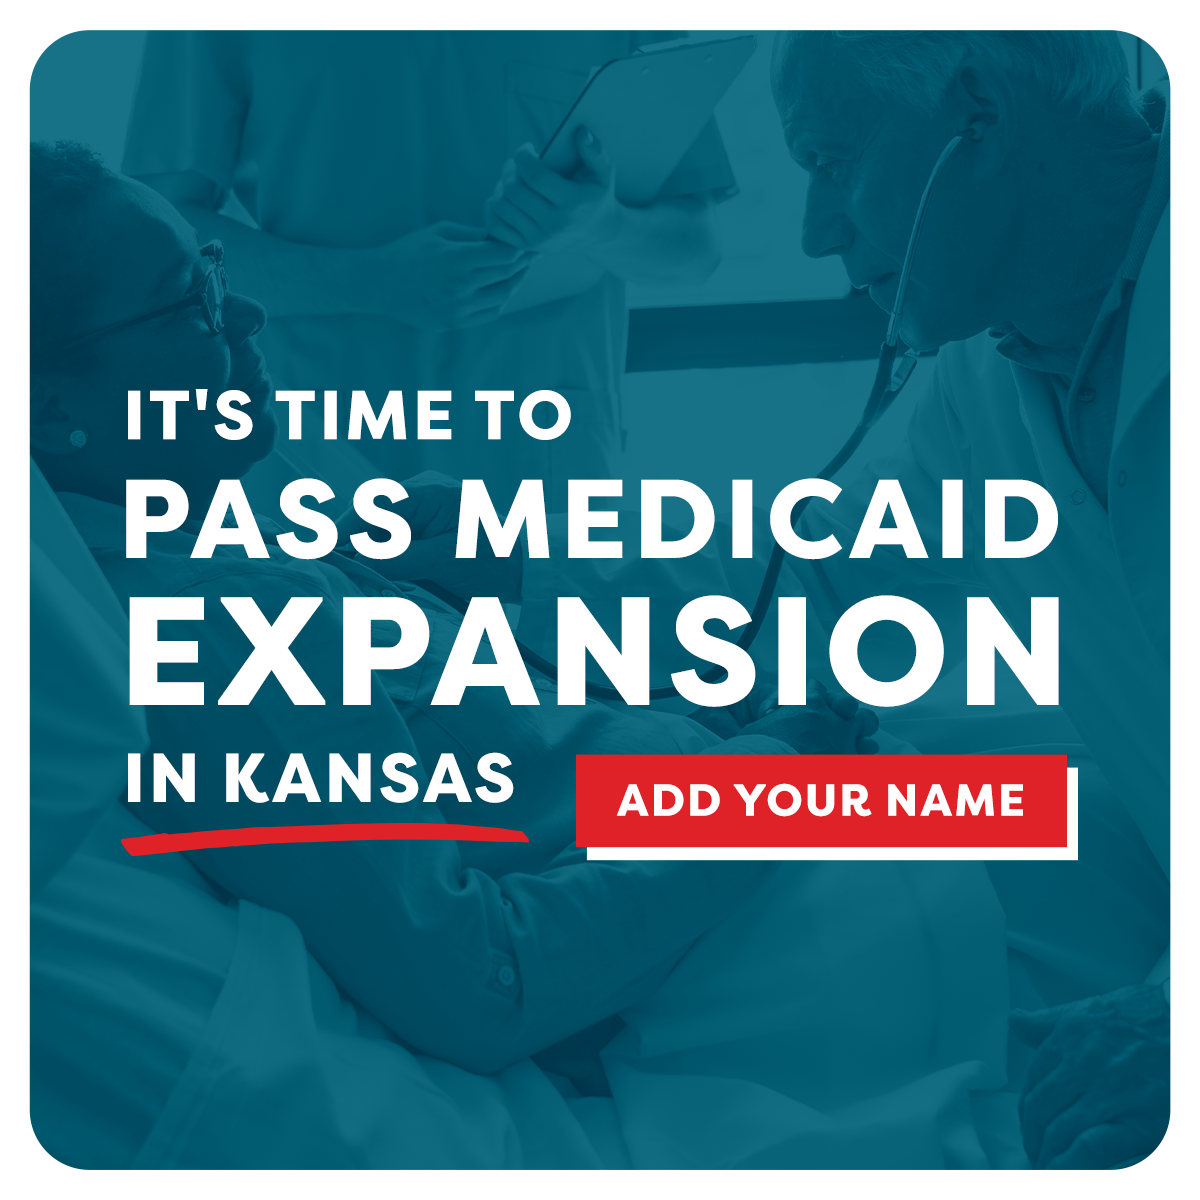 Kelly_MedicaidExpansion_041222_1200x1200.png